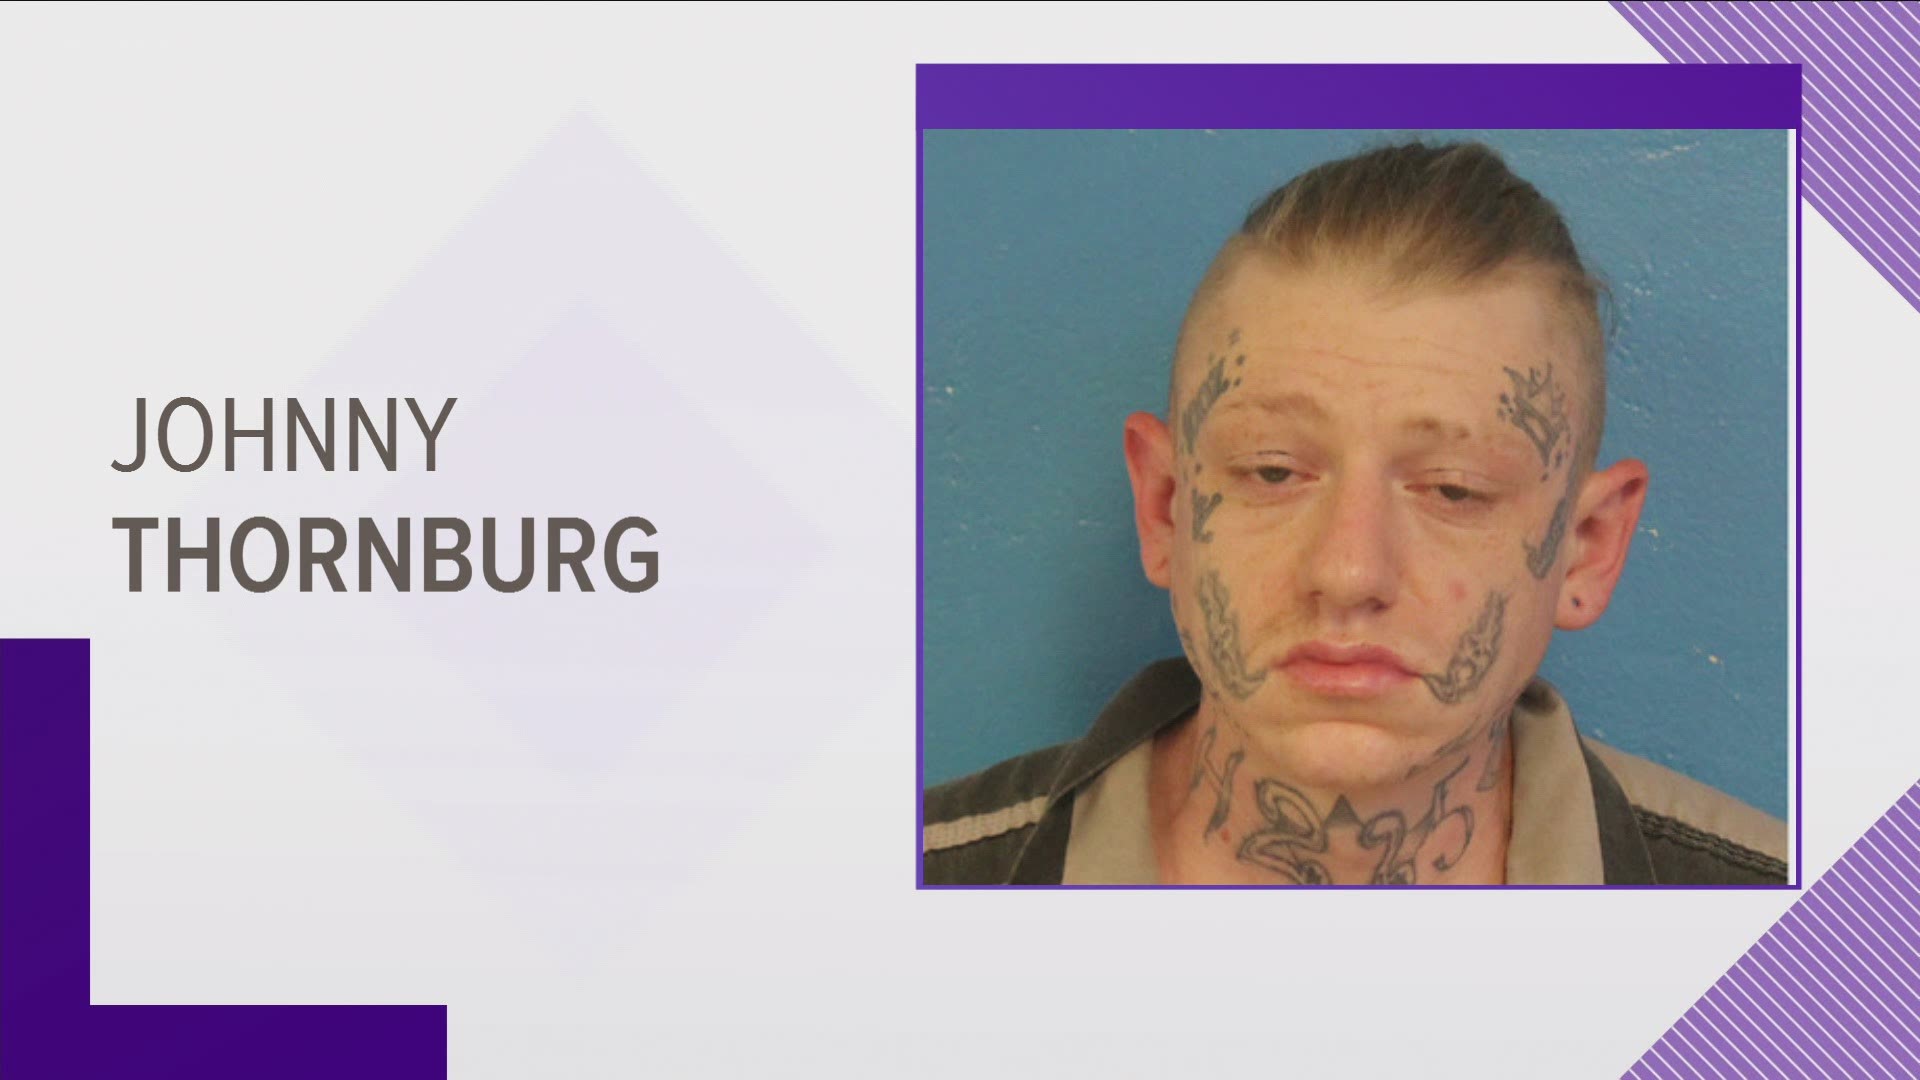 A Greene County man is accused of crashing a stolen vehicle and leaving a 4-month-old helpless before running away.